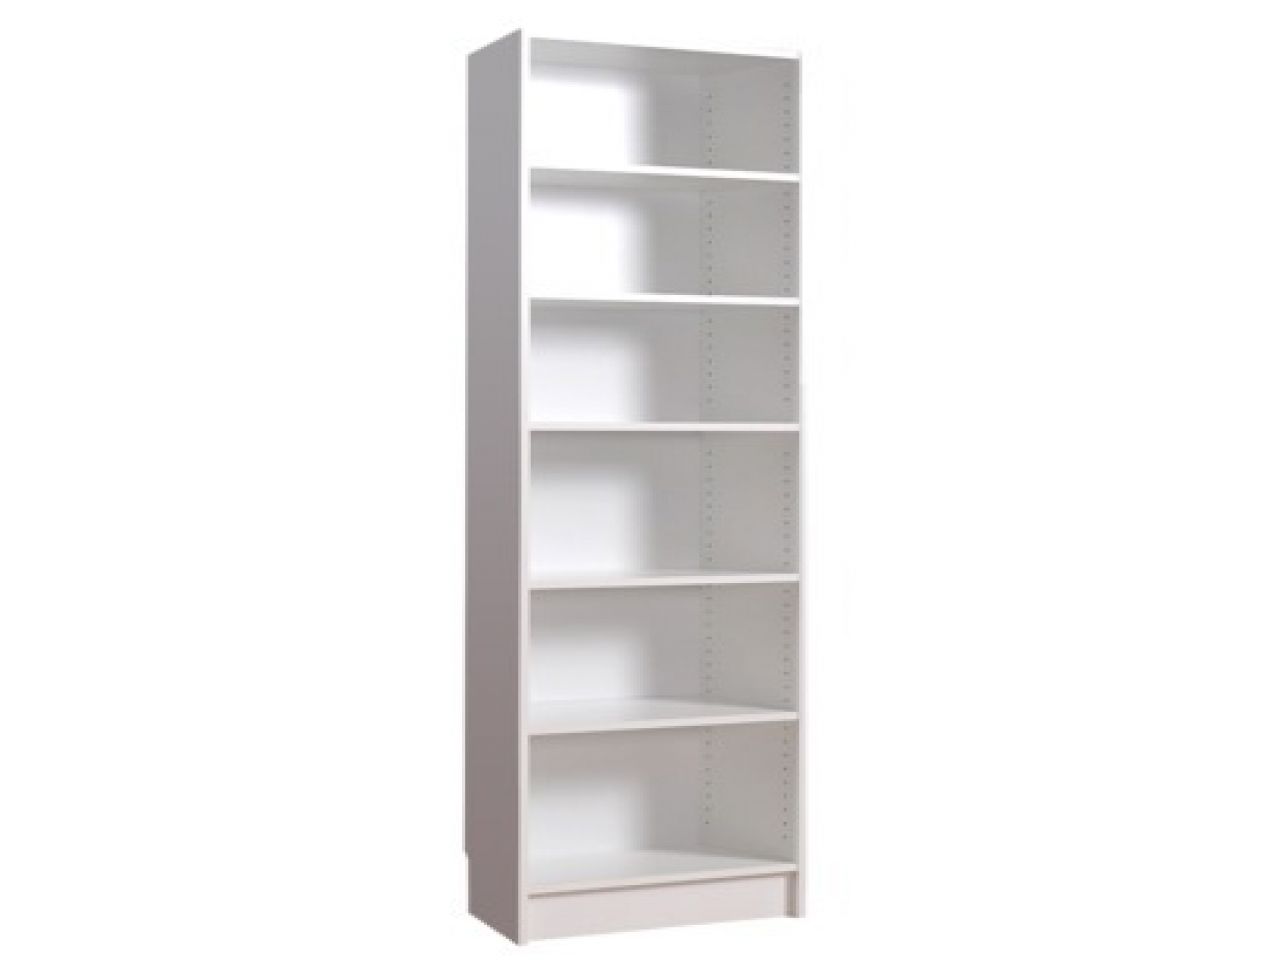 Bookcase White Tall Home Design Furniture Decorating Contemporary Intended For Very Tall Bookcase (View 9 of 15)